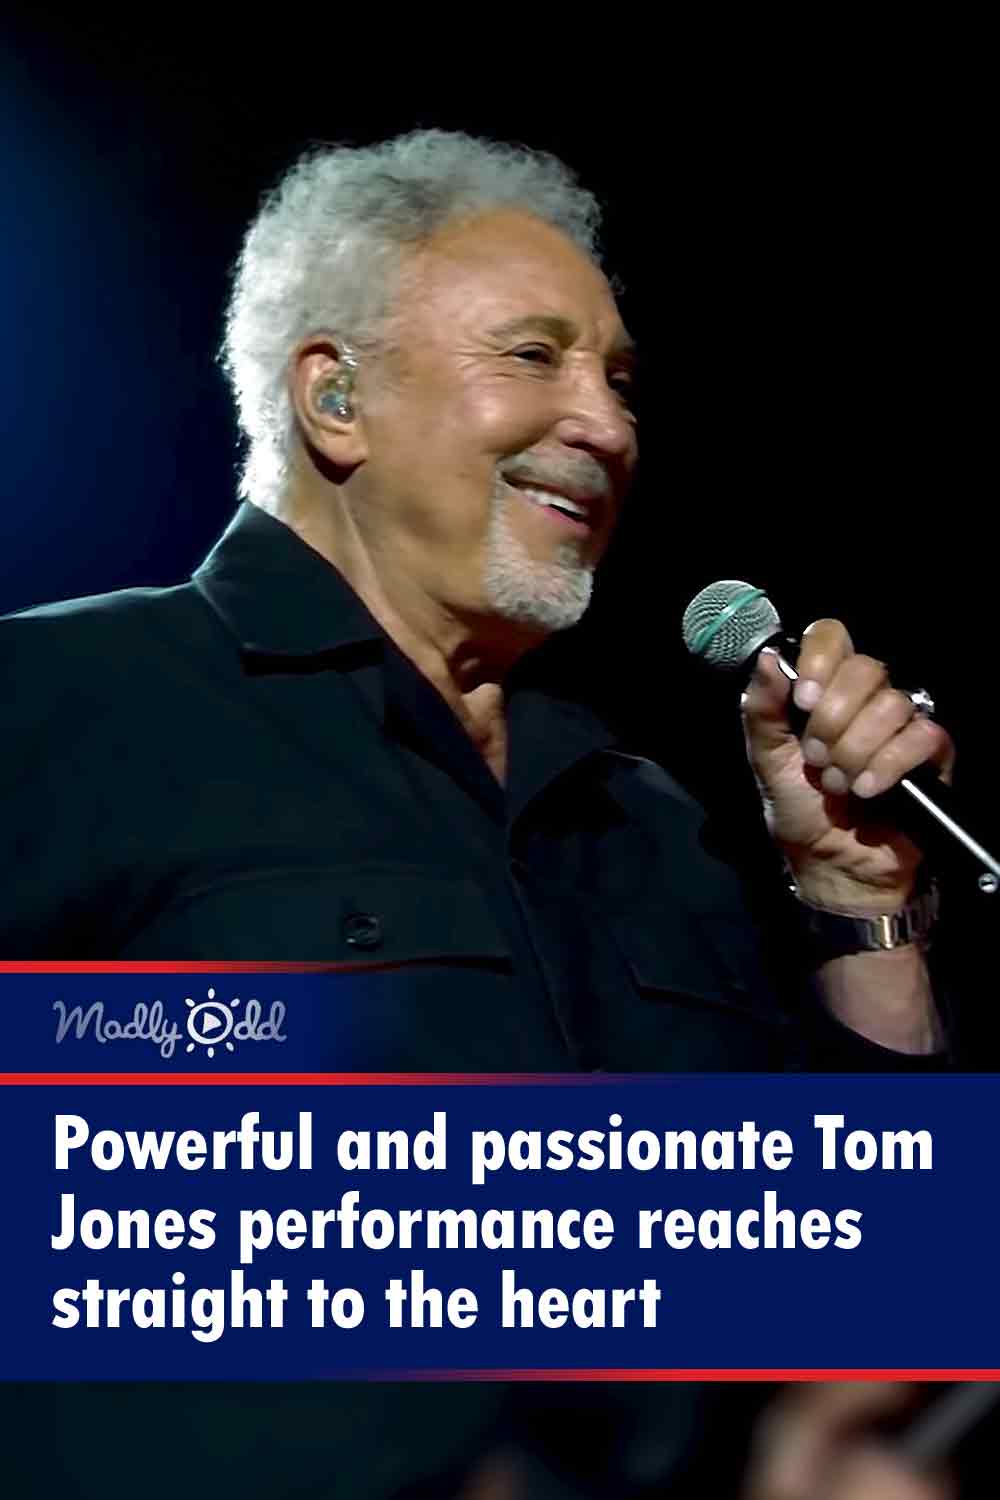 Powerful and passionate Tom Jones performance reaches straight to the heart